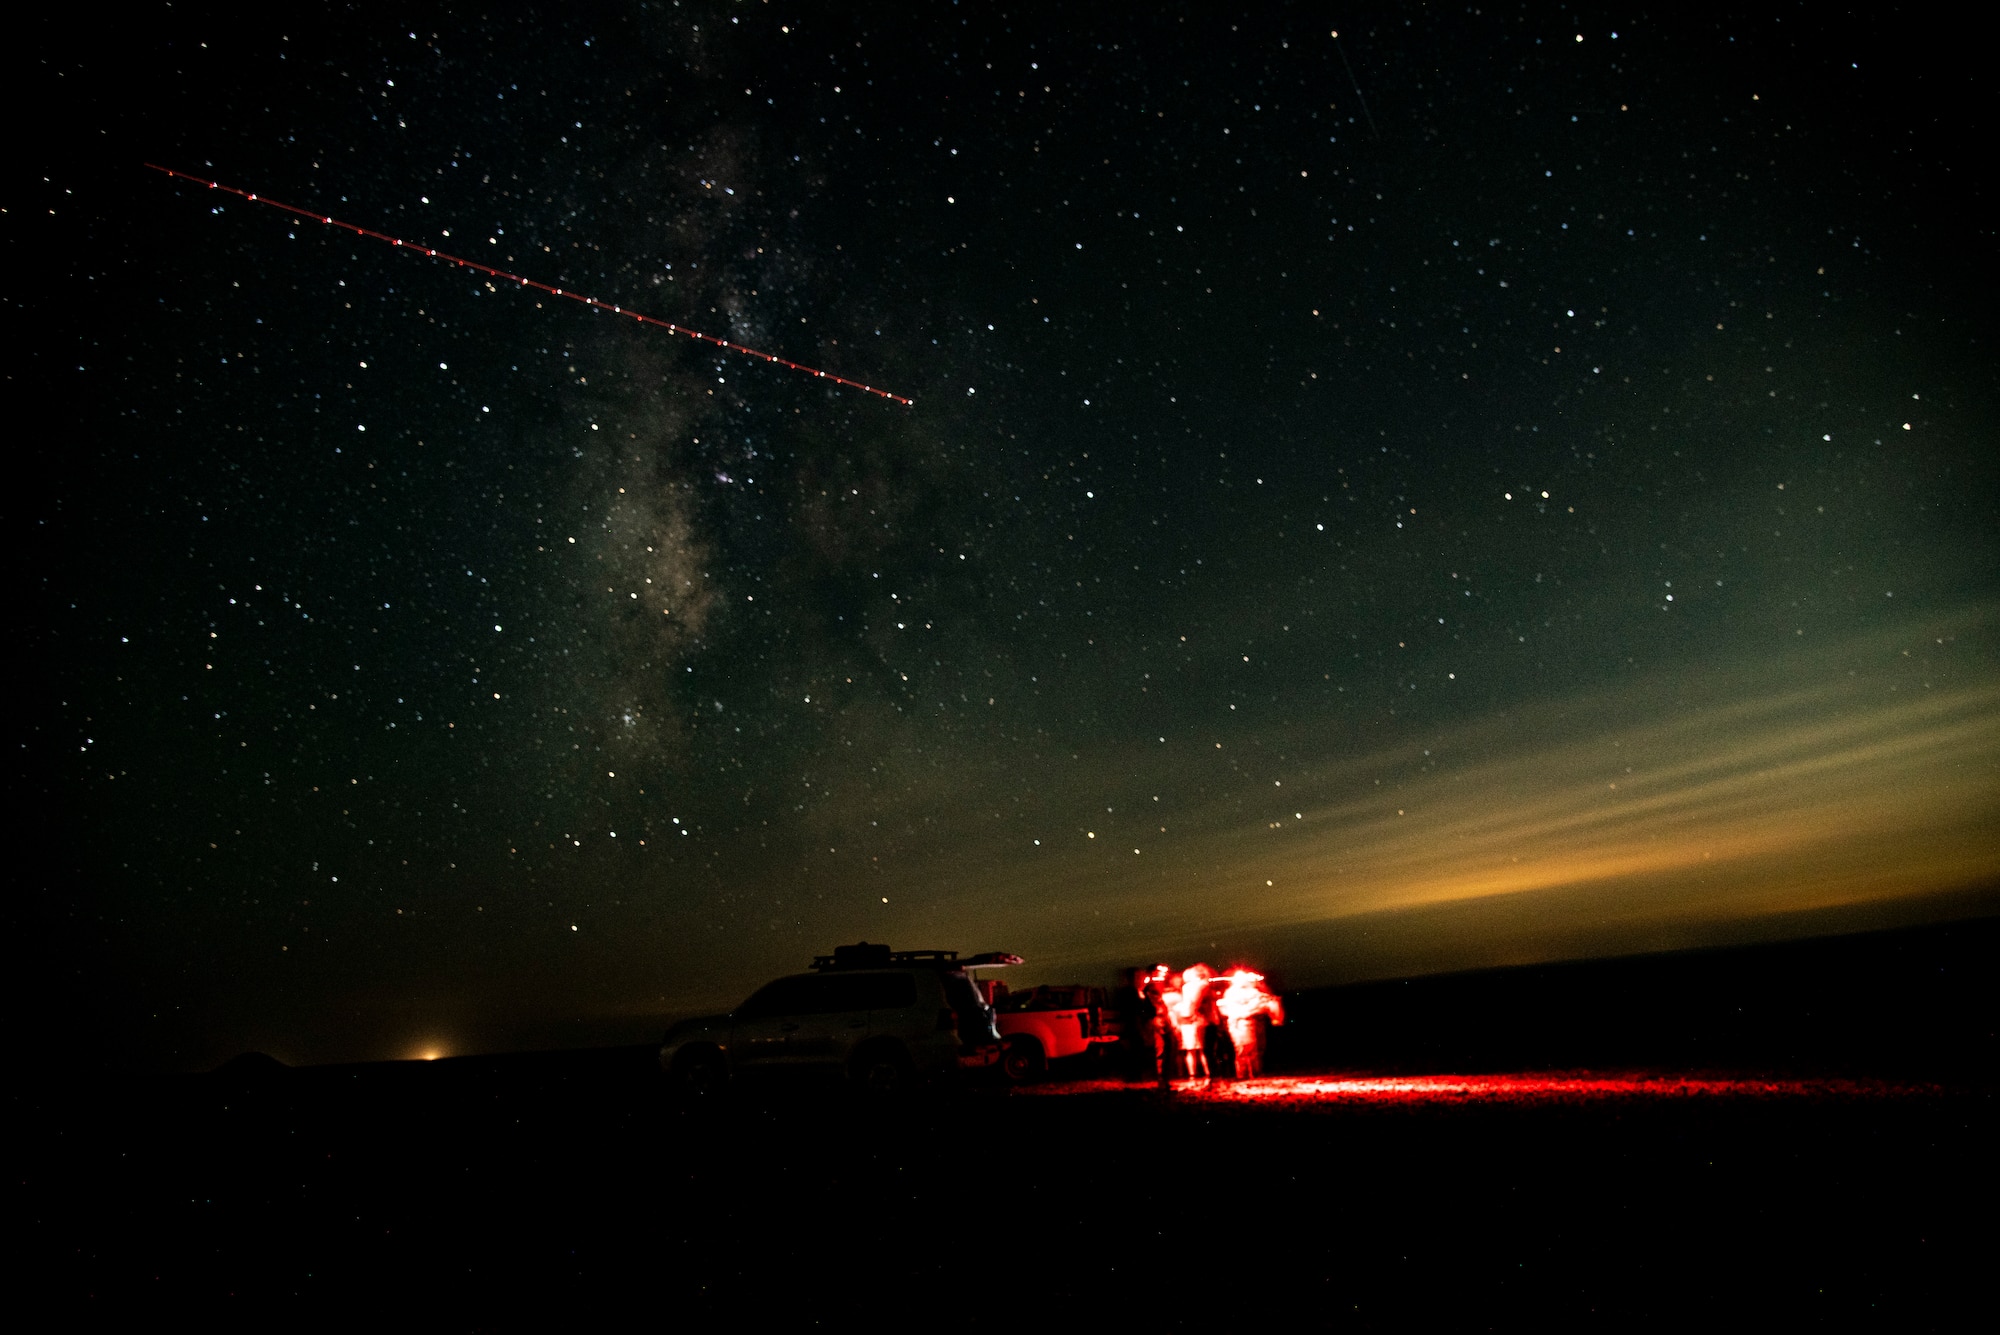 U.S. Air Force Tactical Air Control Party specialists with Combined Special Operations Task Force - Levant and the 335th Expeditionary Fighter Squadron along with Joint Forward Observers with the Army and Naval Special Warfare conduct AC-130 and Fighter Integration at an undisclosed location in Southwest Asia, August 19th, 2022. Long exposure photos. (U.S. Air Force photo by: Tech. Sgt. Jim Bentley)